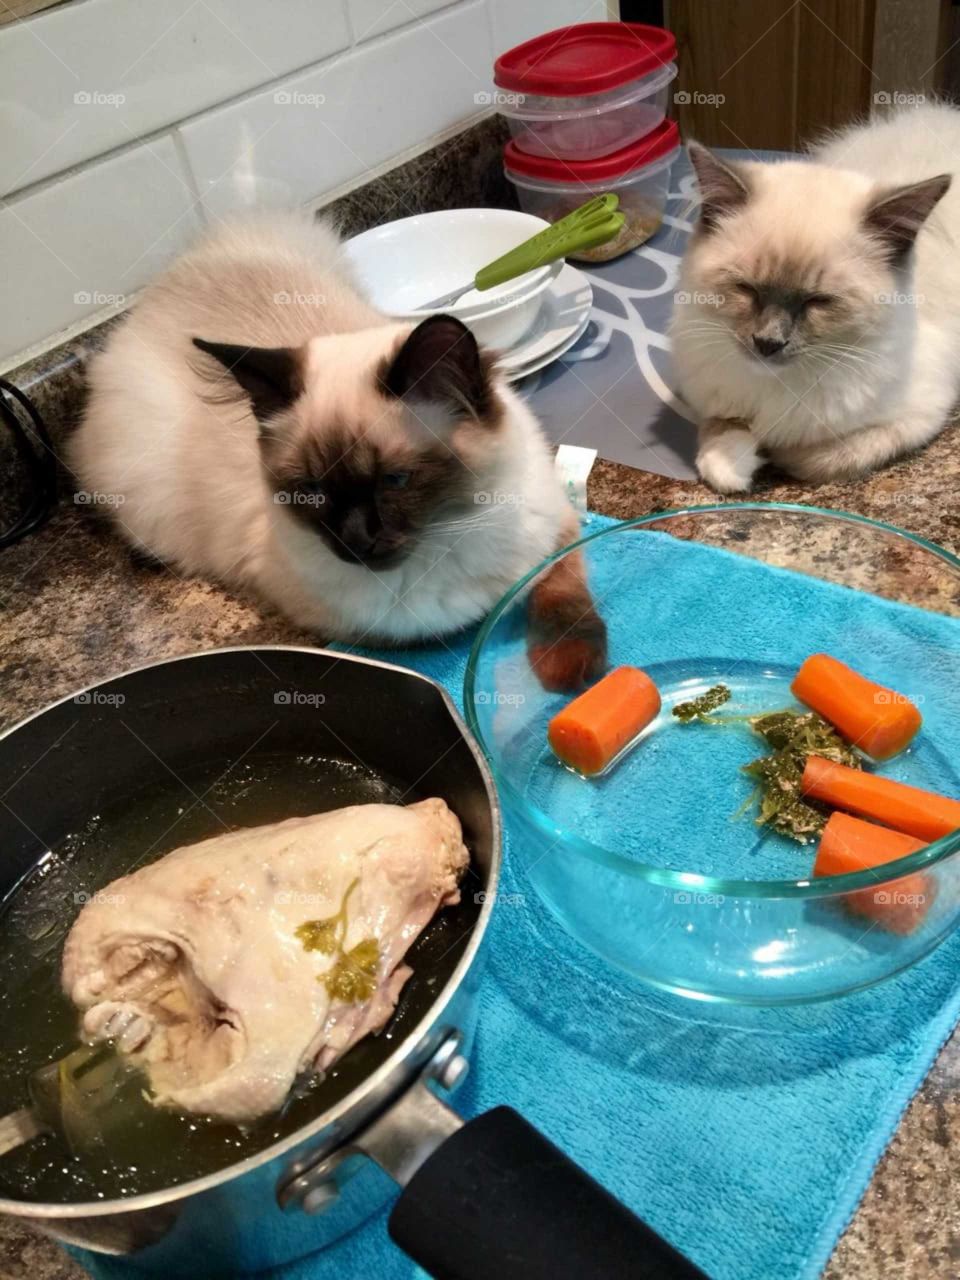 is this our food?